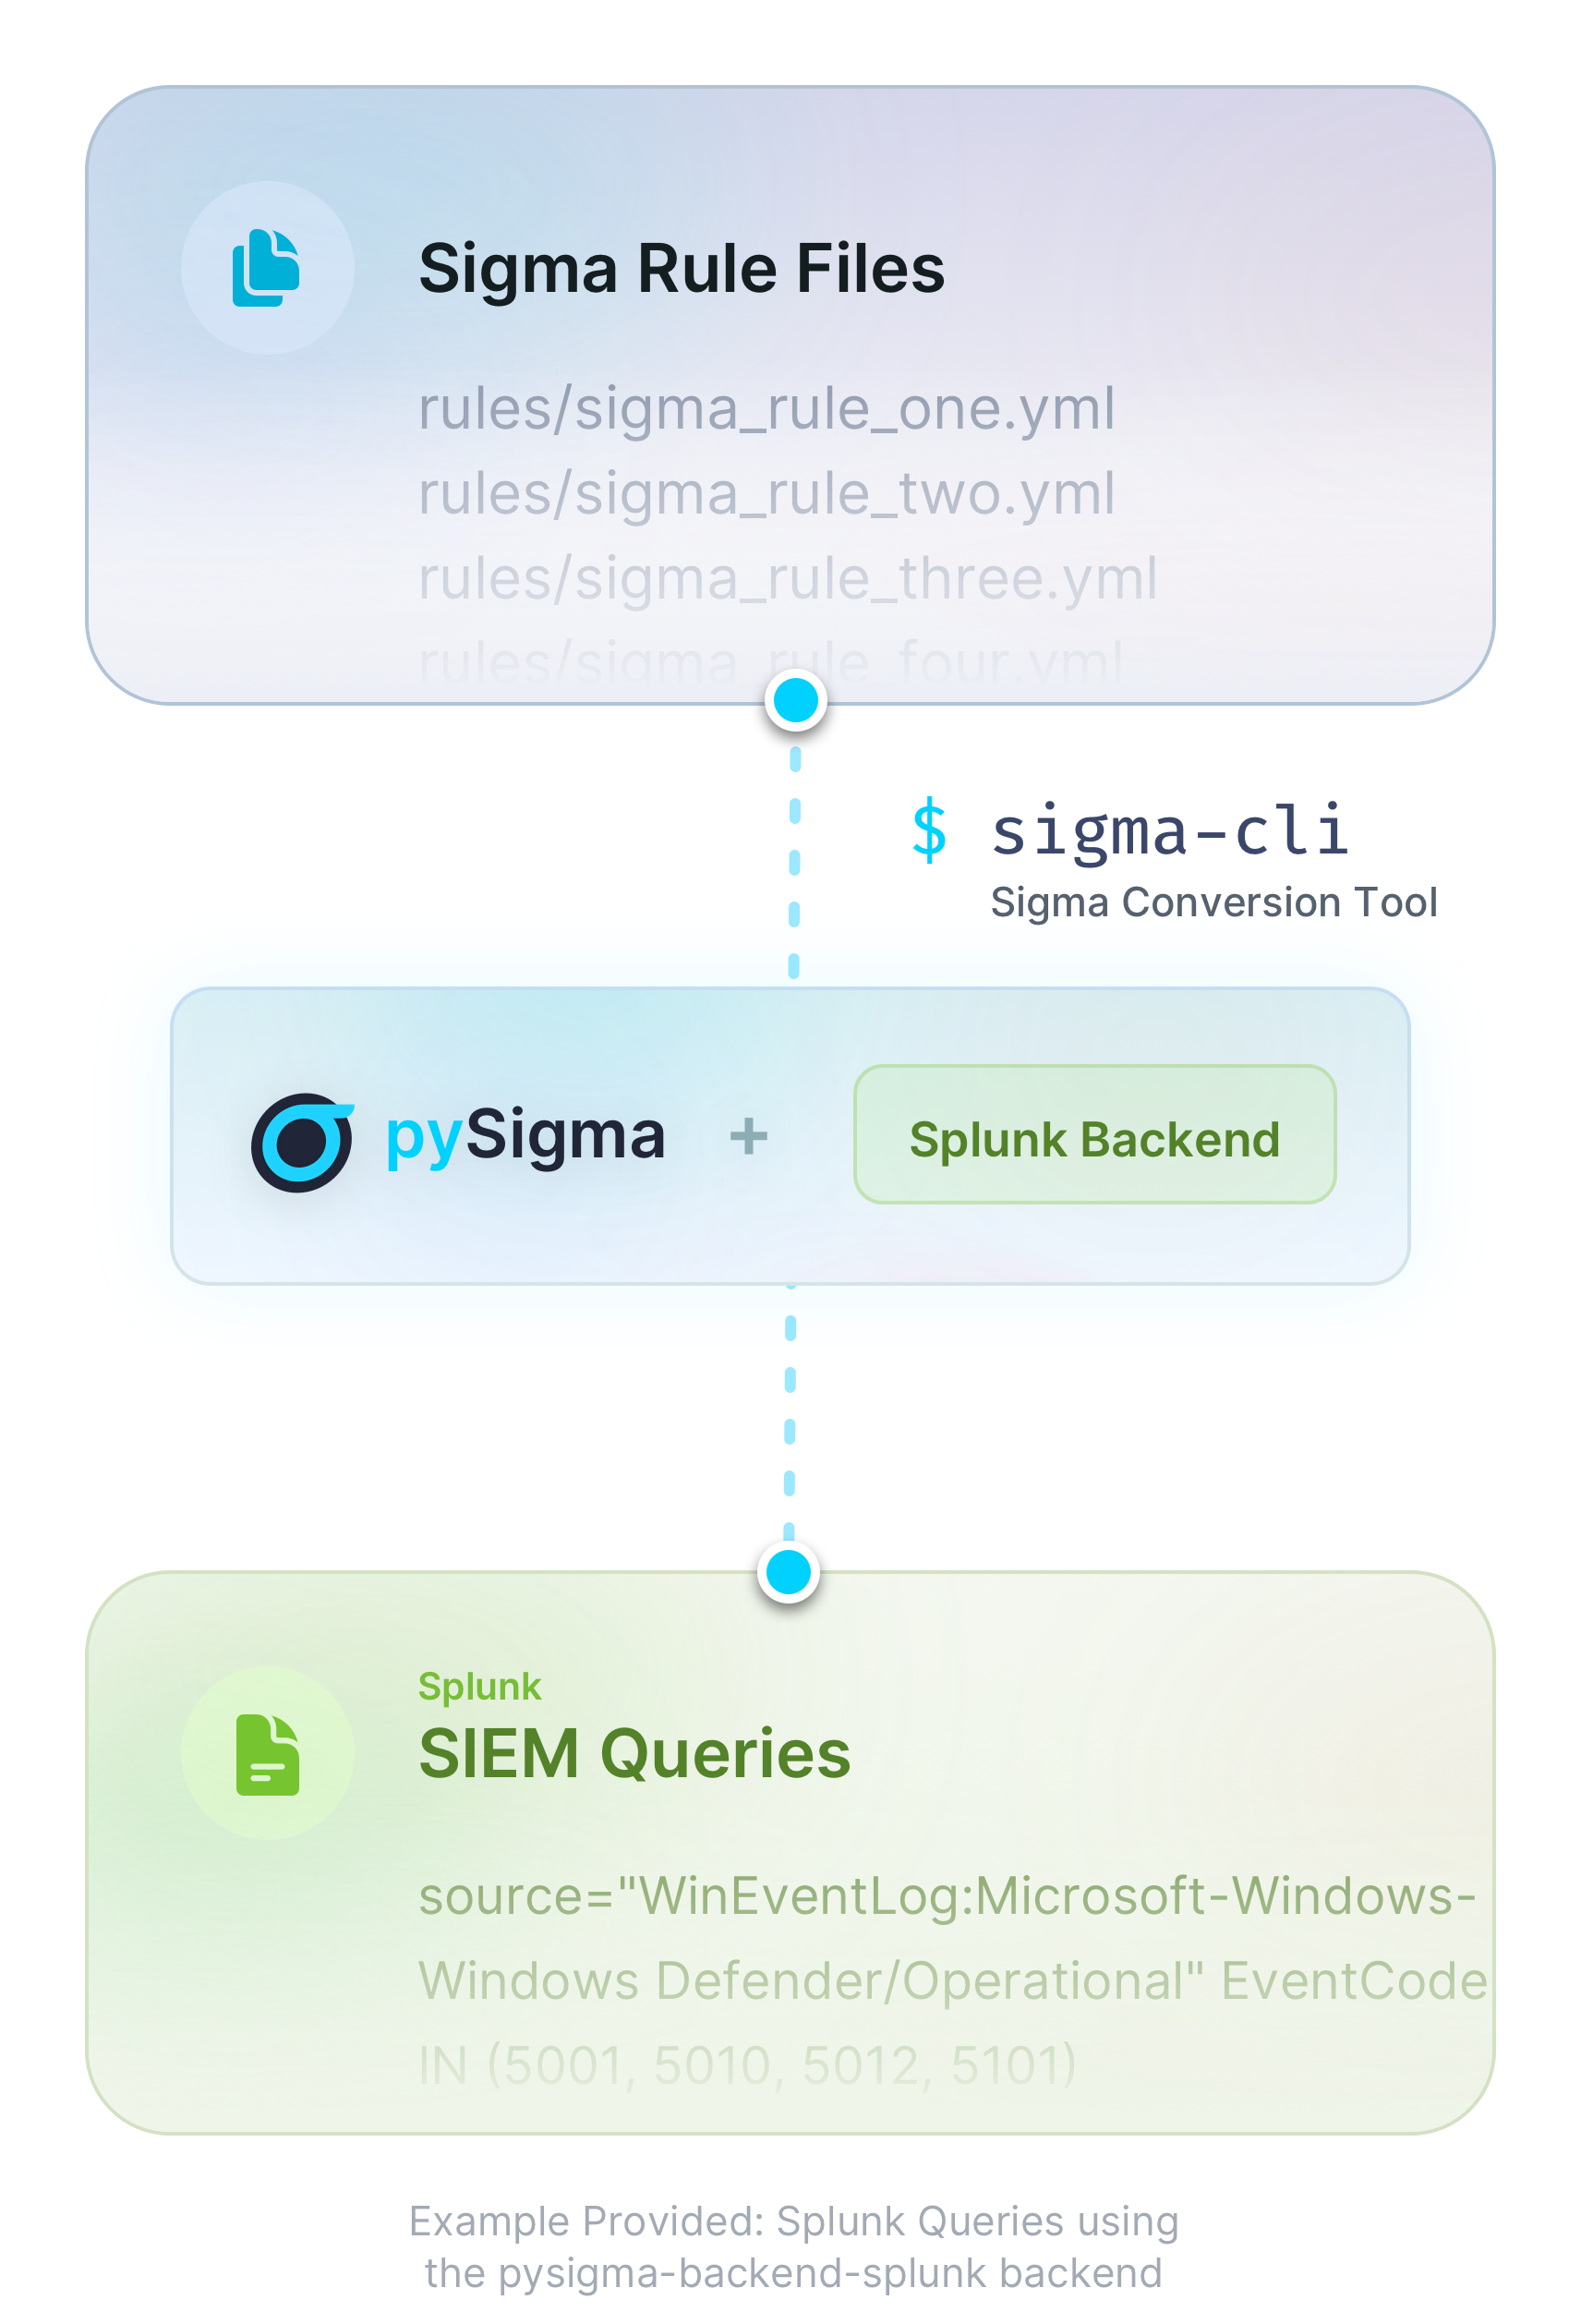 Conversion Diagram - showing the conversion from Sigma Rule Files (top) through pySigma, and down to the final stage where the rule files have been converted to string SIEM queries